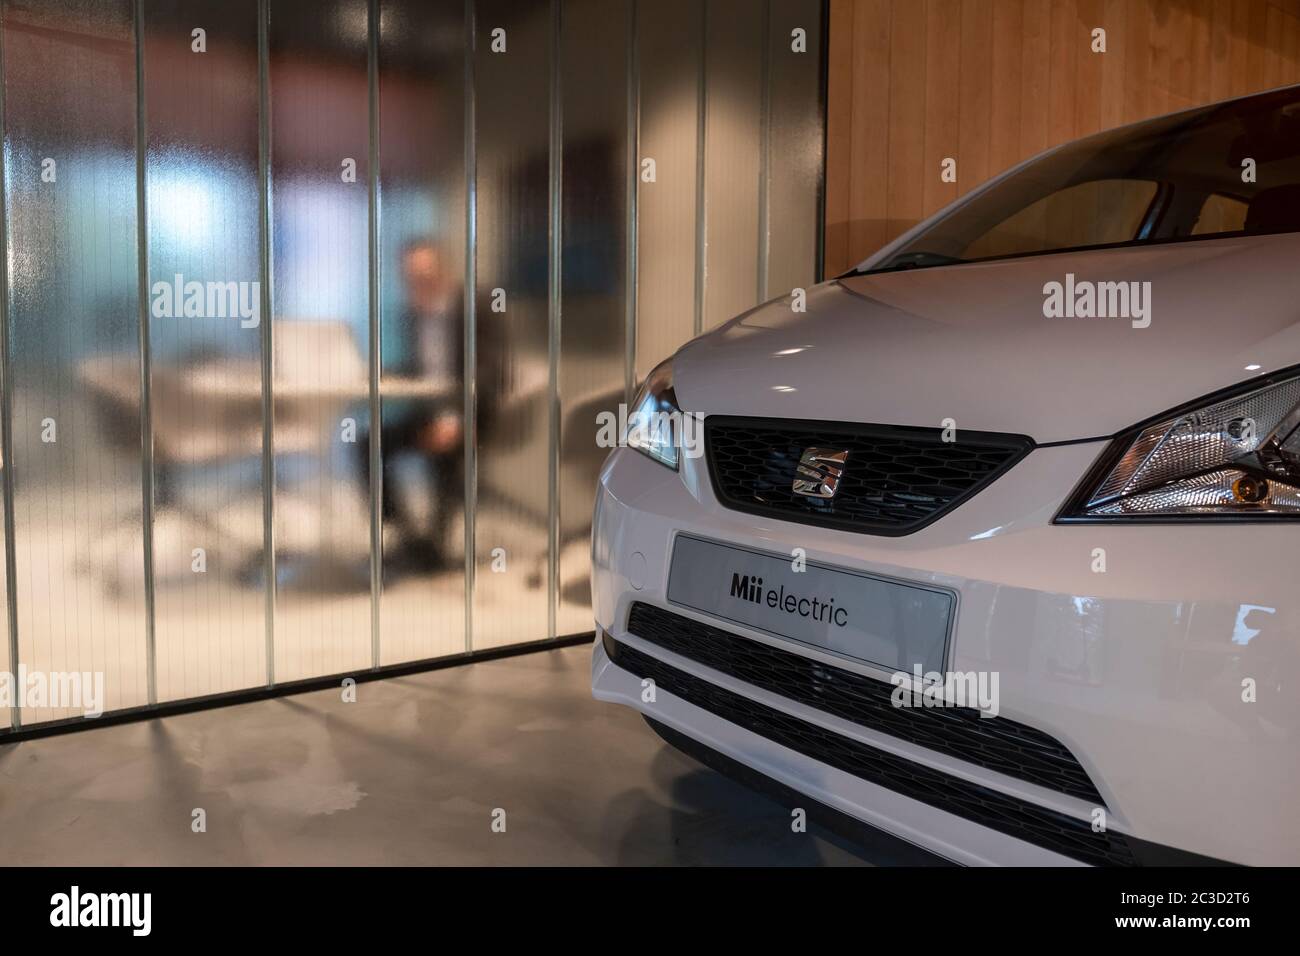 Barcelona, Spain. 19th June, 2020. The SEAT Mii Electric 61 KW model is seen at Seat's new concept store located on Passeig de Gràcia in Barcelona. The car company SEAT opens a new multidisciplinary store space in the heart of Barcelona. Credit: SOPA Images Limited/Alamy Live News Stock Photo